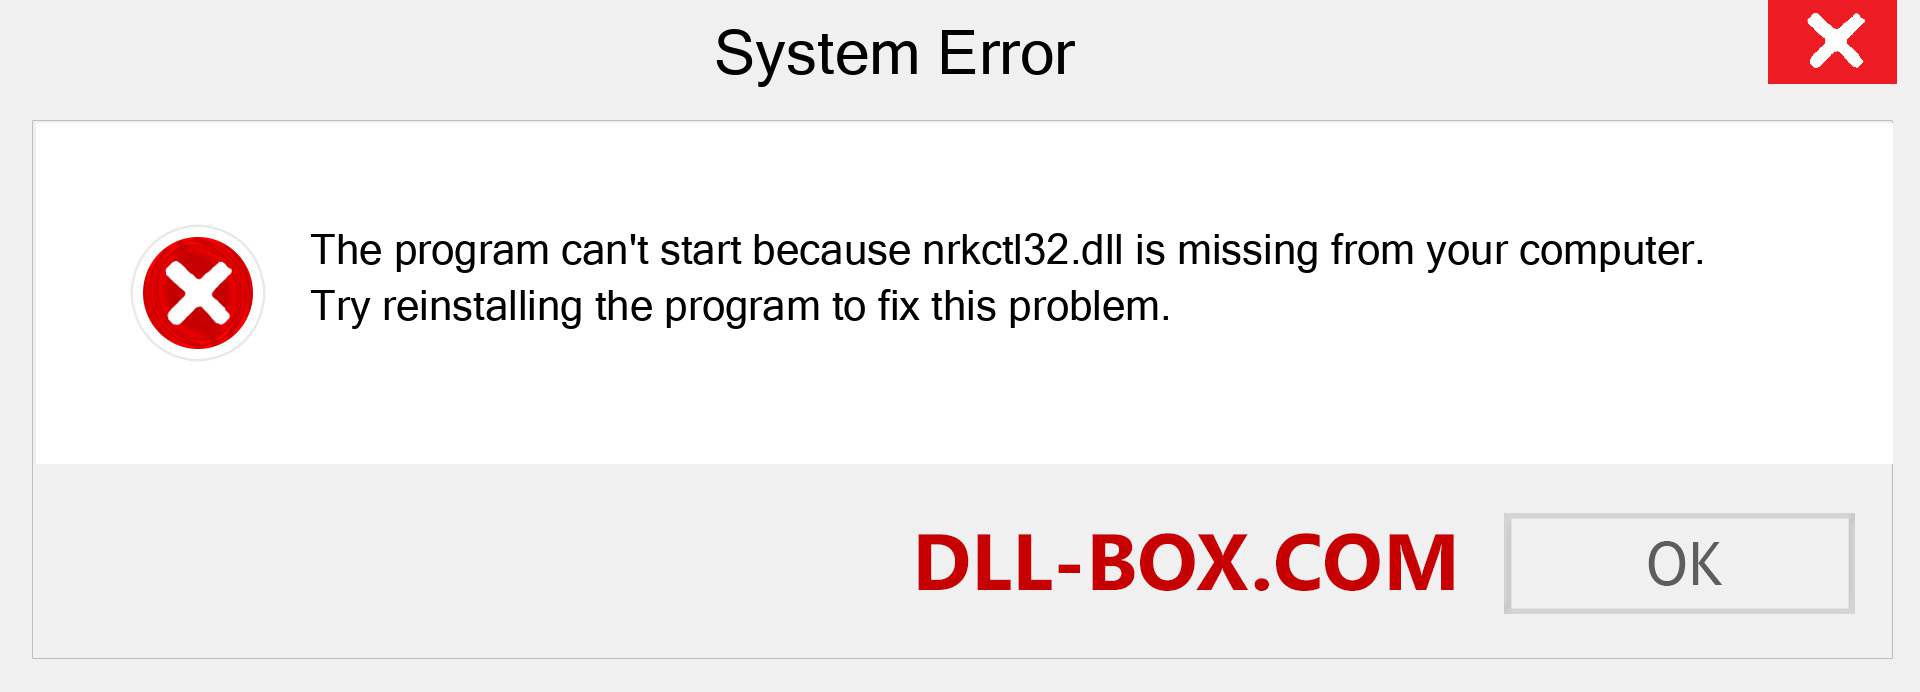  nrkctl32.dll file is missing?. Download for Windows 7, 8, 10 - Fix  nrkctl32 dll Missing Error on Windows, photos, images